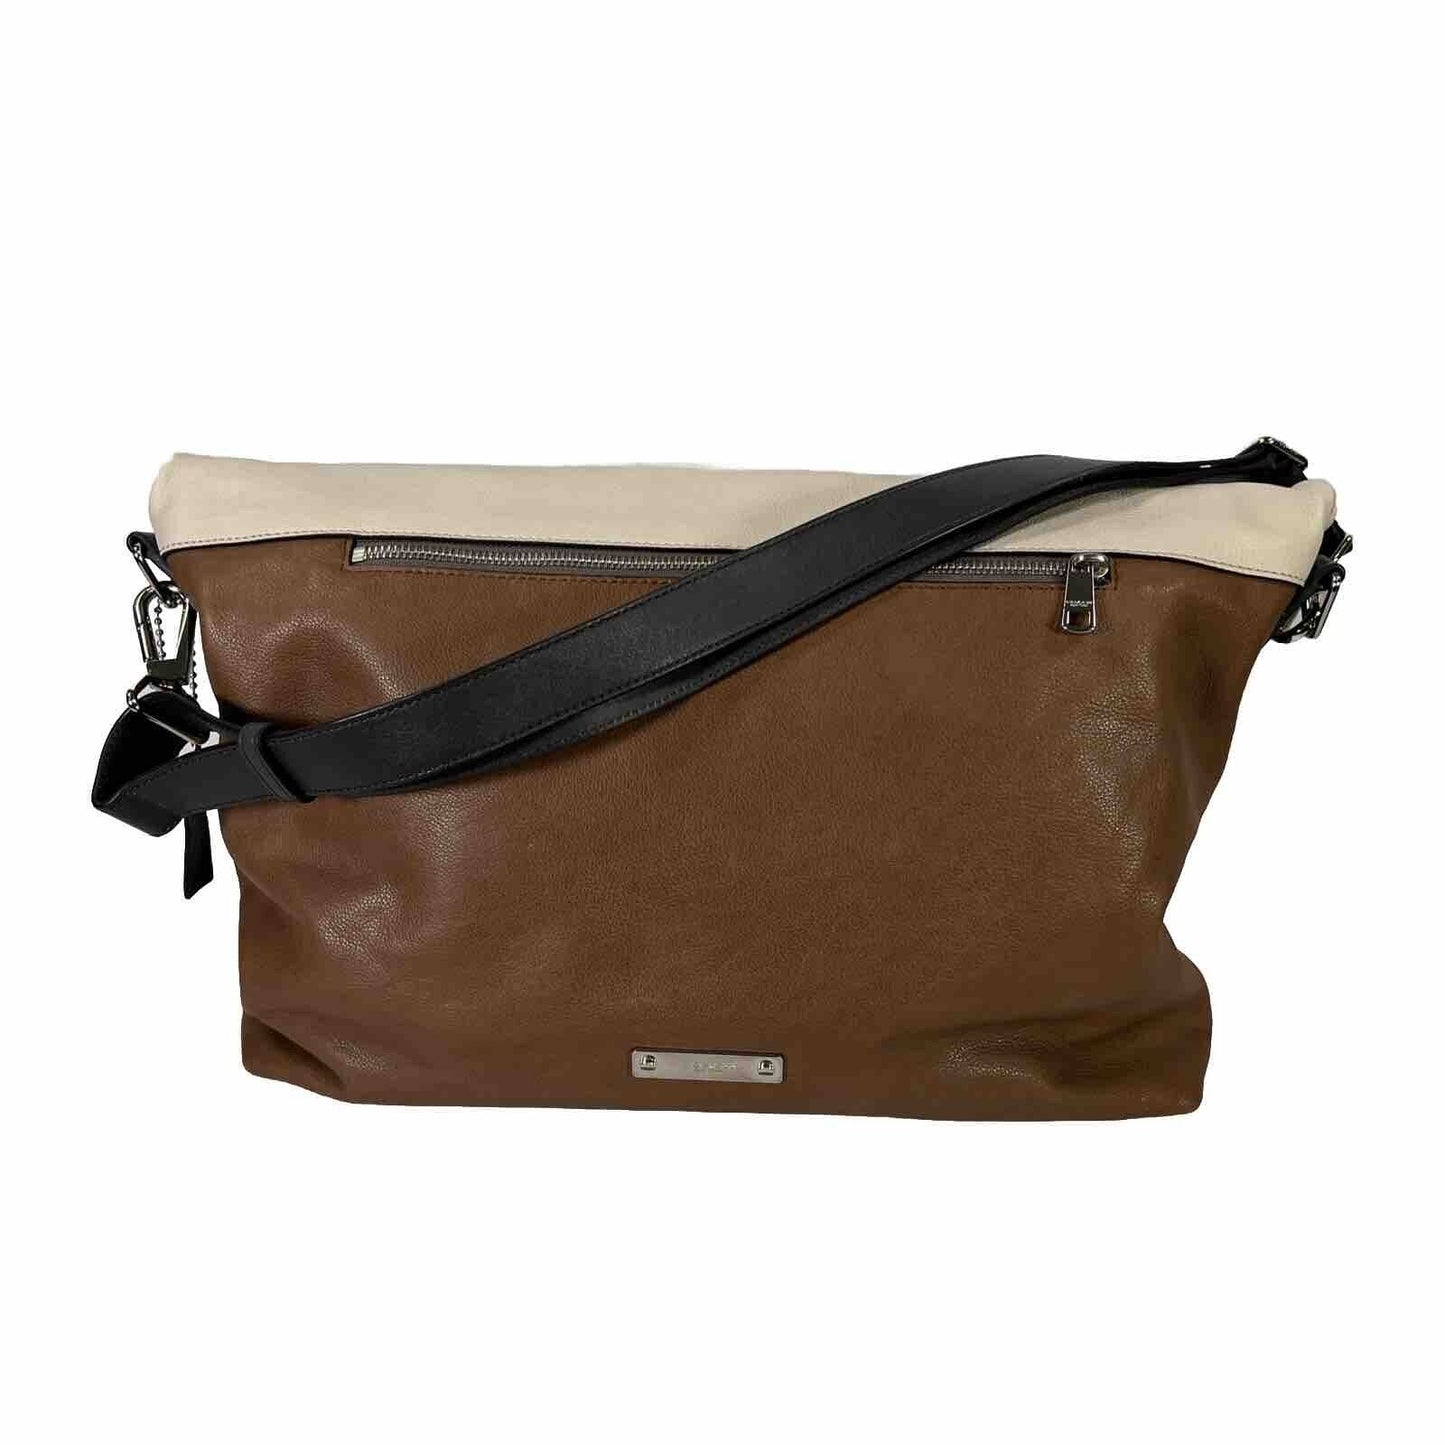 Coach Men's Ivory/Brown Leather Thompson Colorblock Foldover Bag